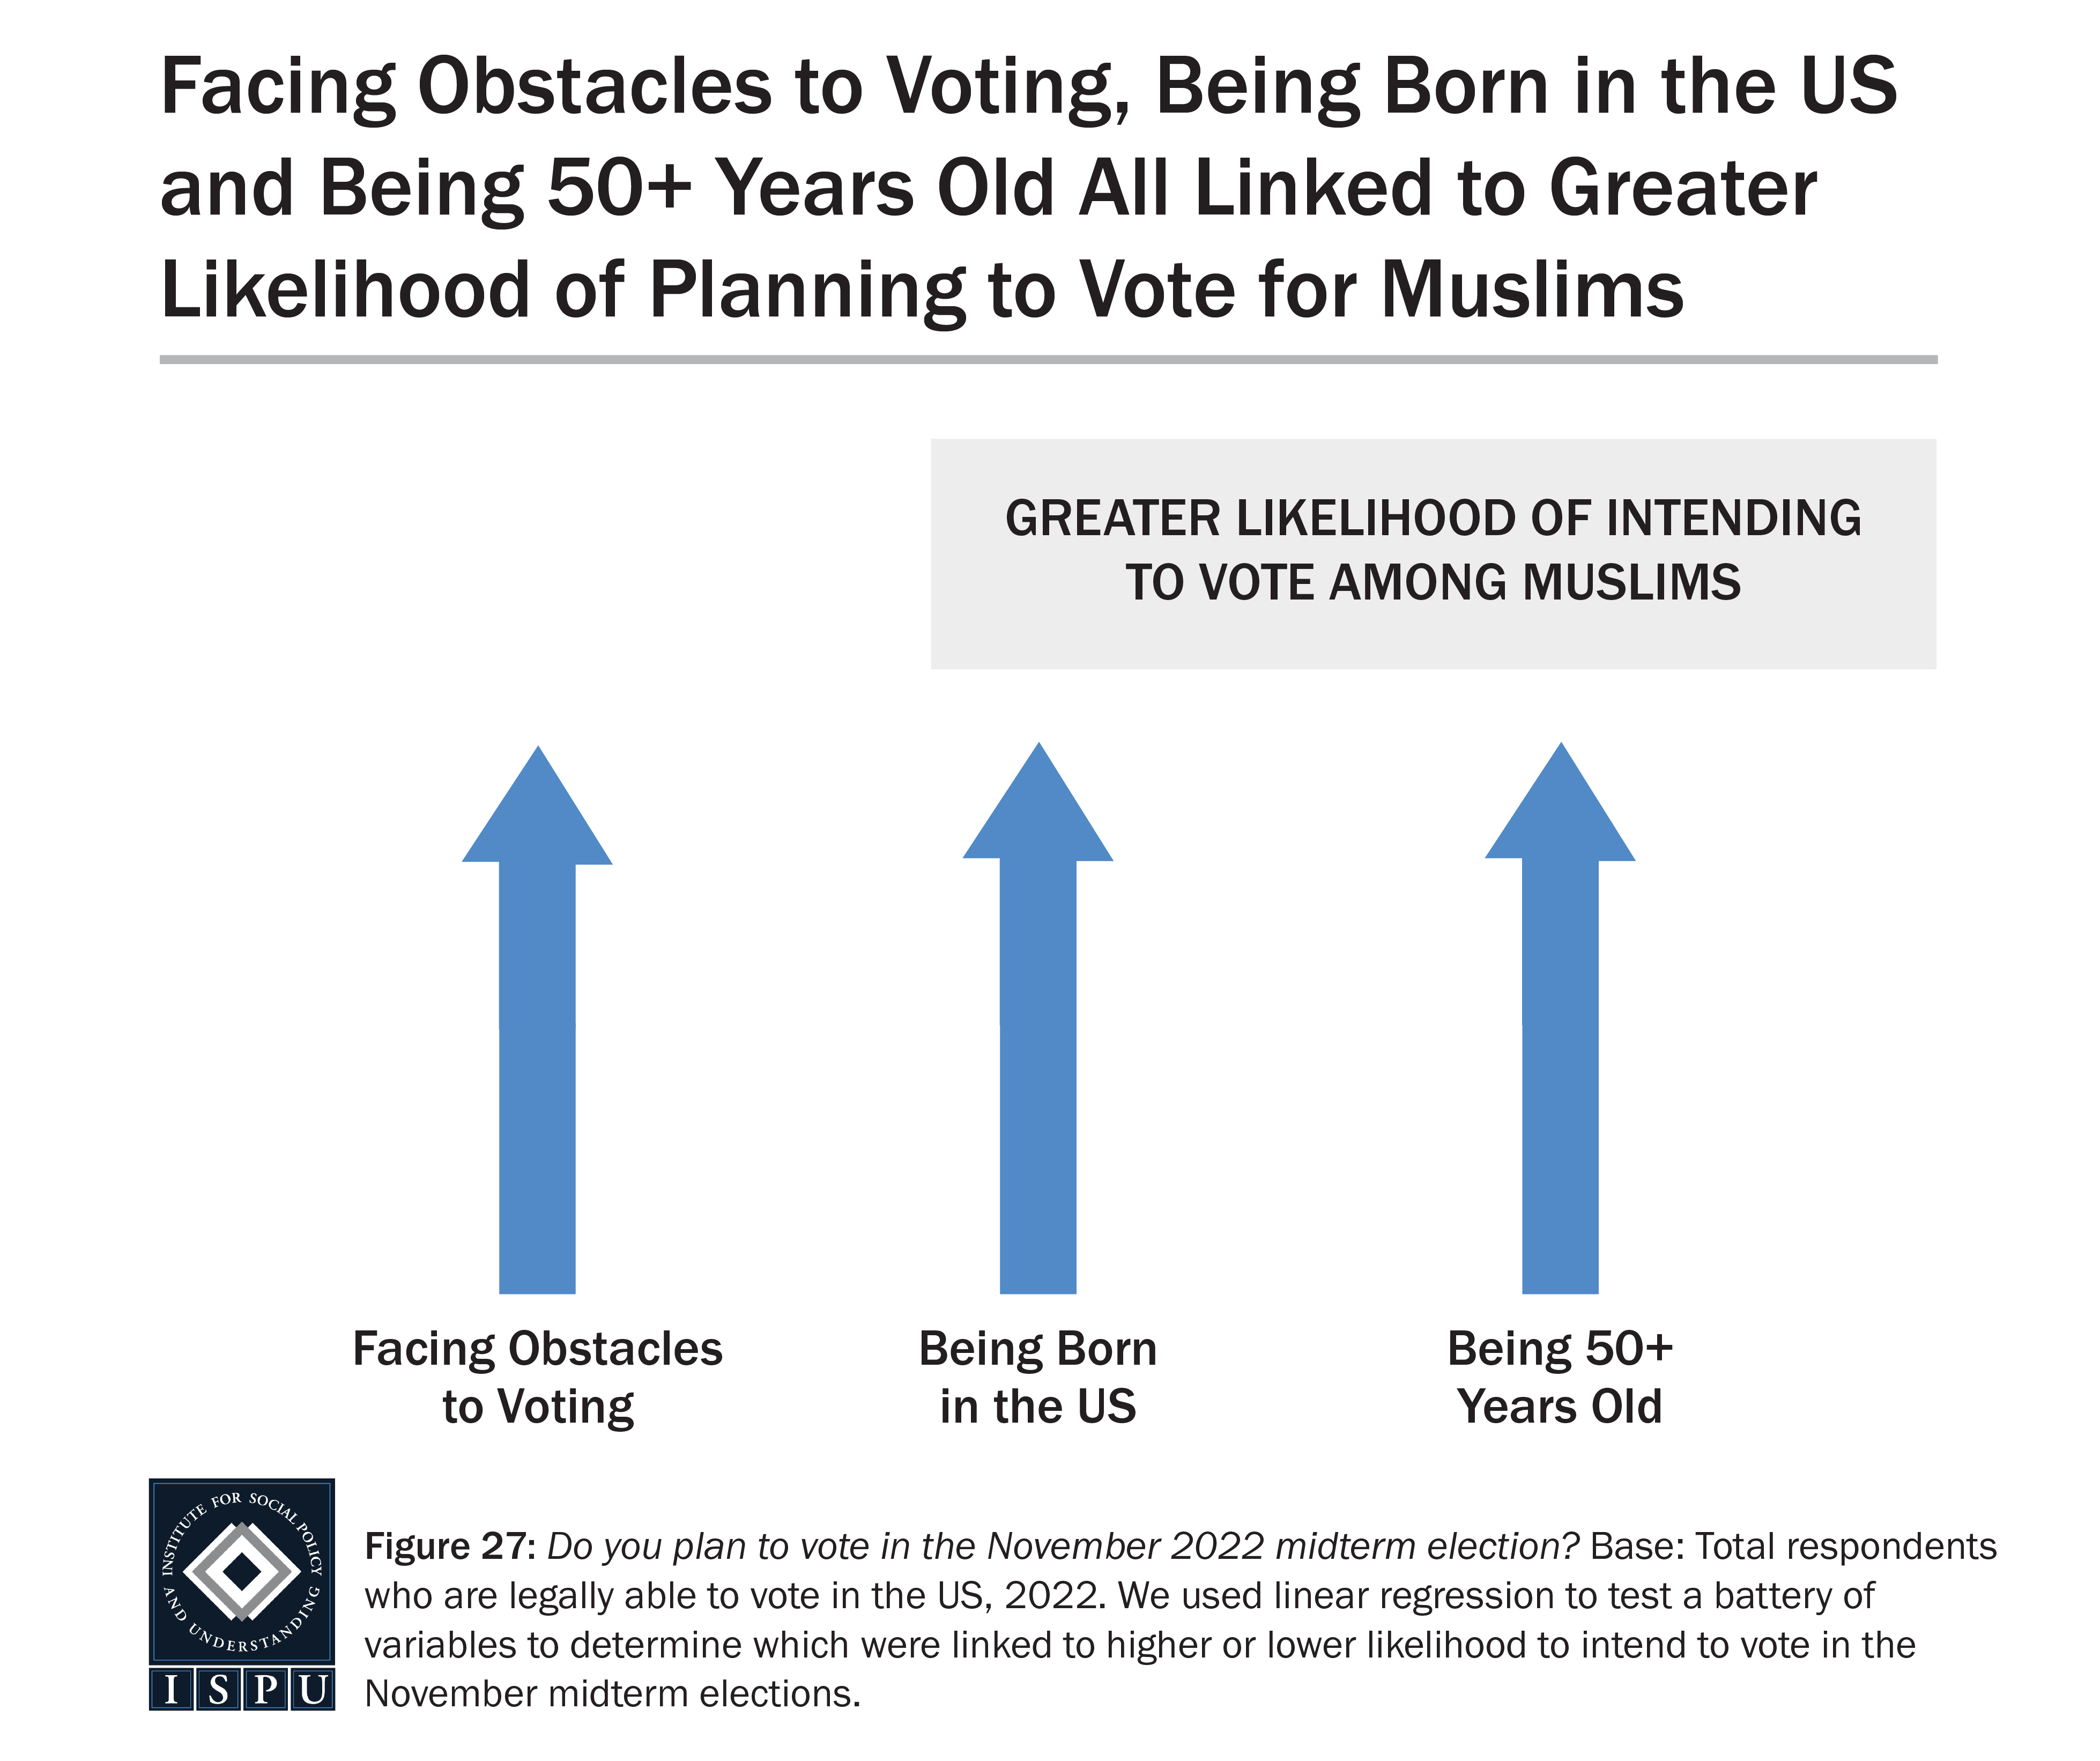 Results of a linear regression analysis showing factors linked to greater likelihood of planning to vote in the November 2022 mid-term elections.